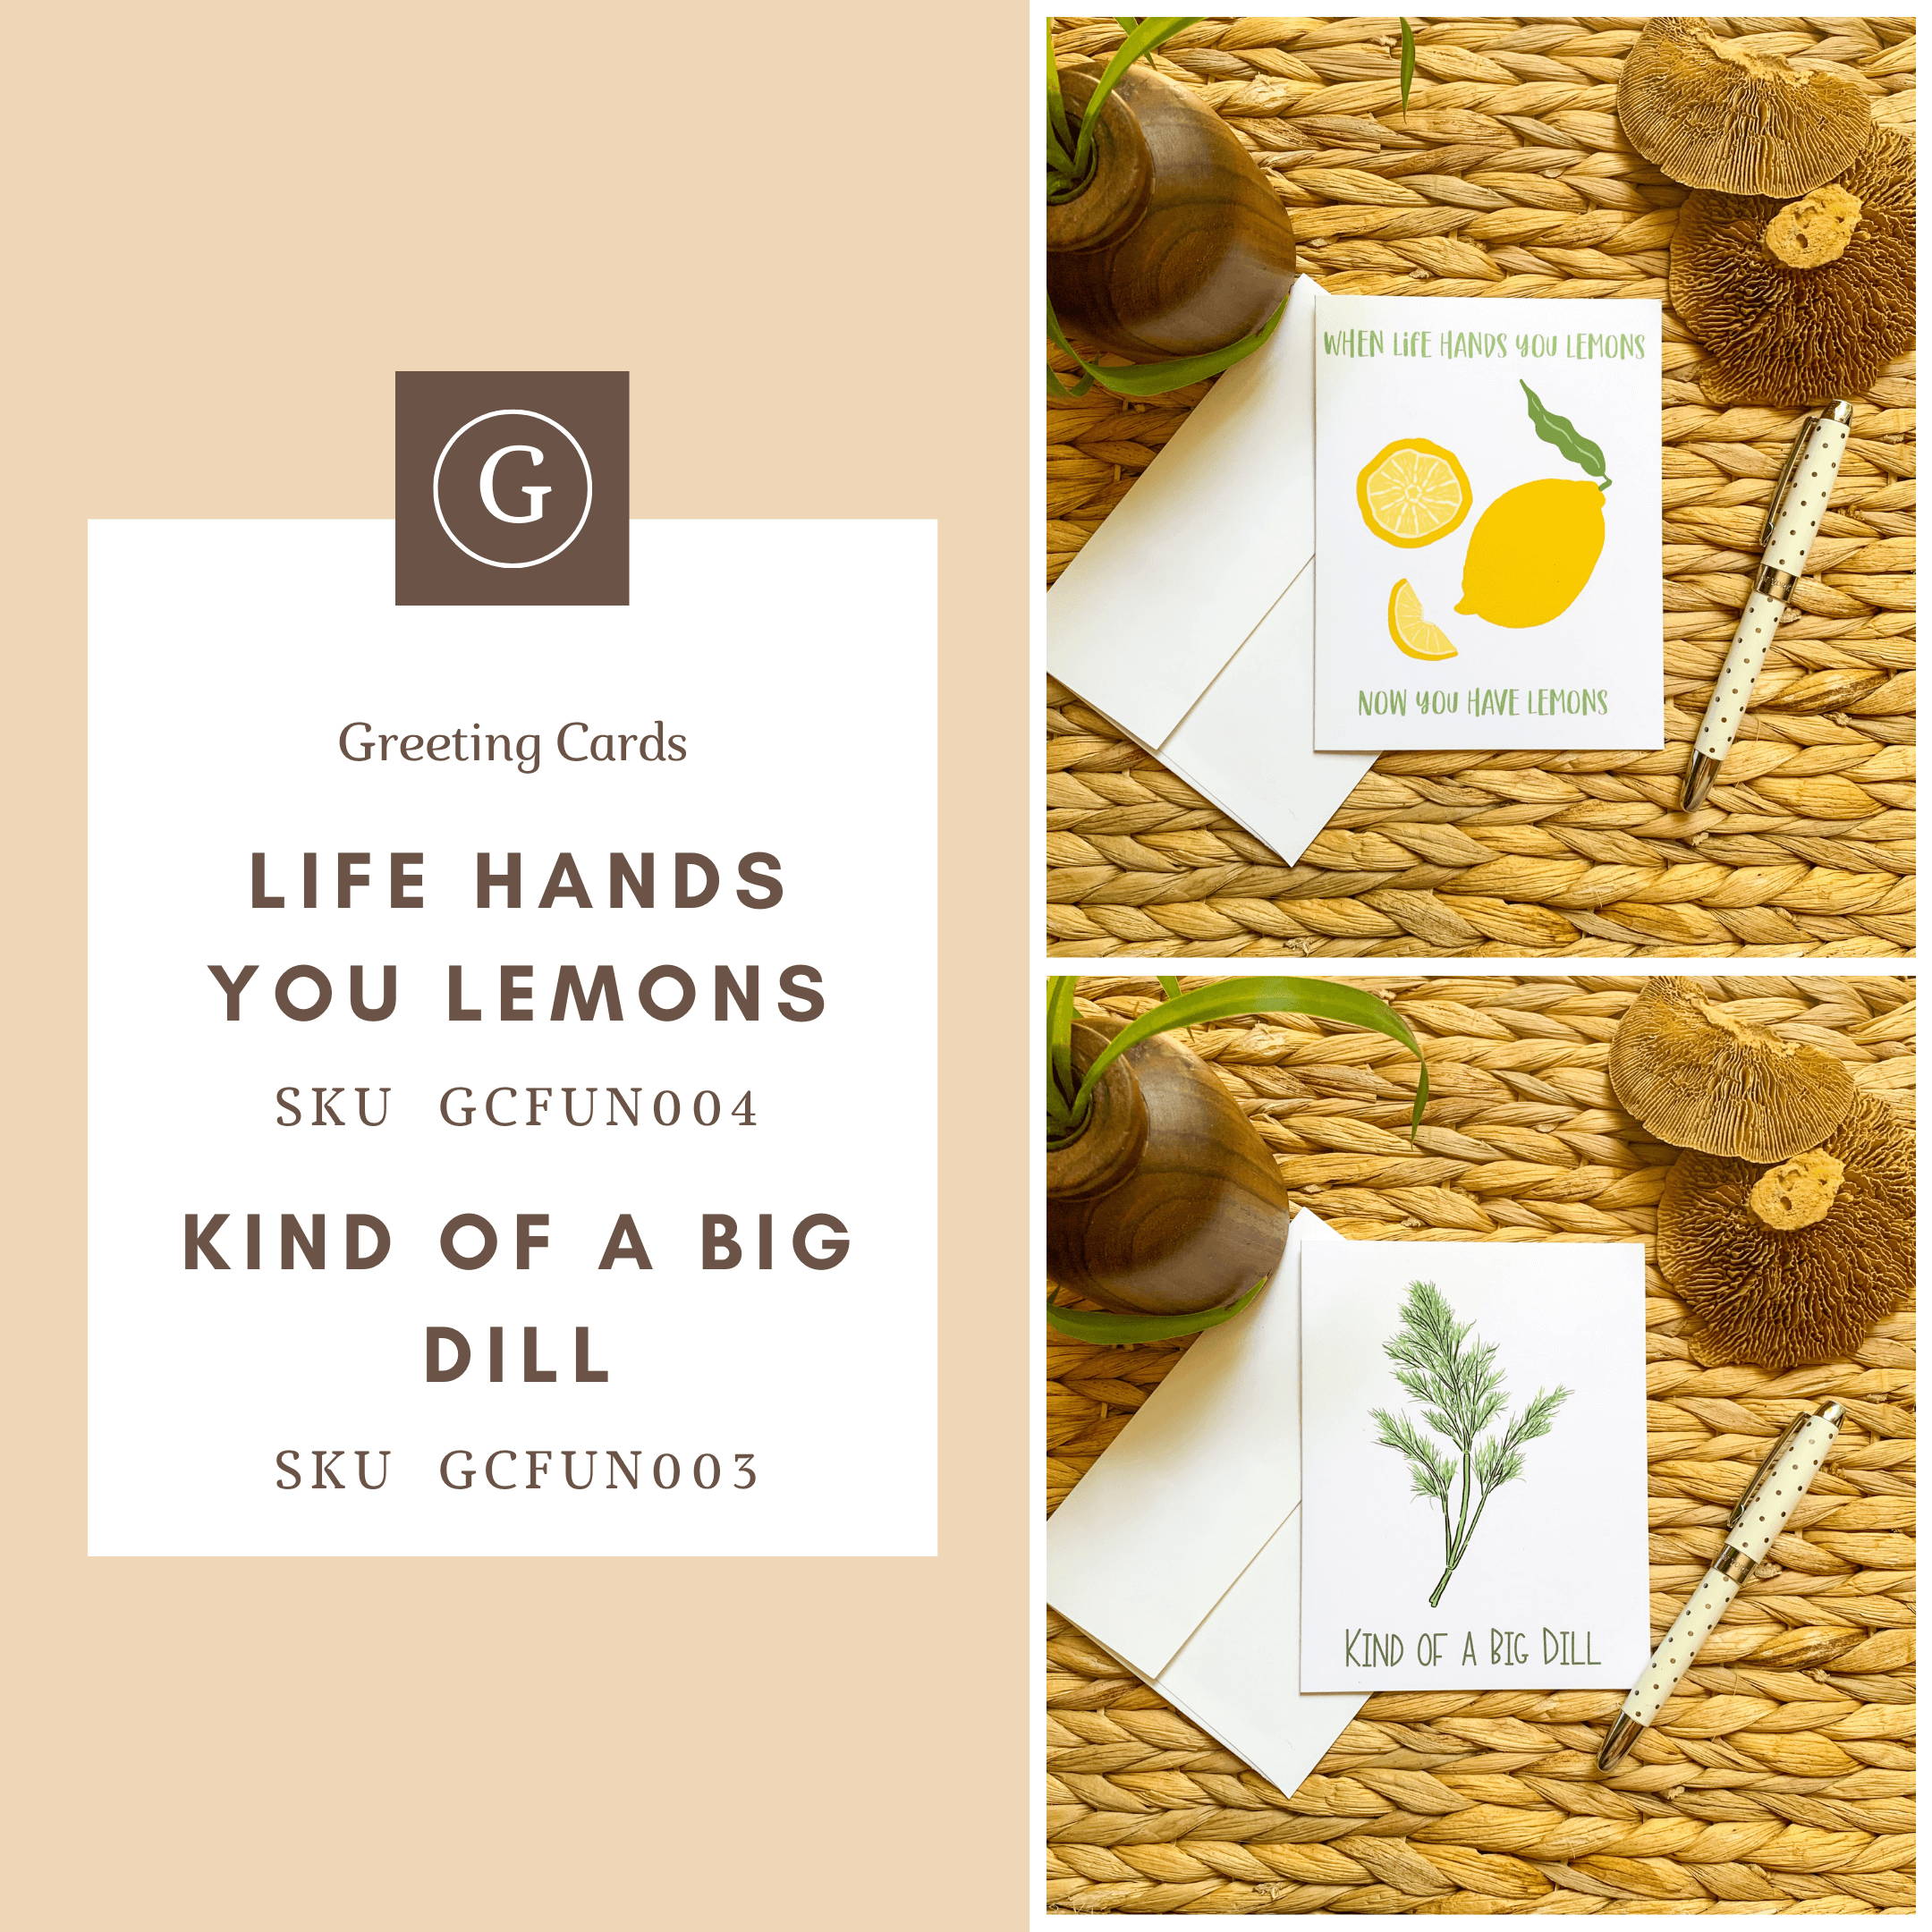 Best selling greeting cards - Life Hands You Lemons - illustration of a lemon, lemon half, and lemon slice with test "When Life Hands You Lemons Now You Have Lemons" SKU GCFUN004 and the Kind of a Big Dill Card with a sprig of Dill (the herb) and the text "Kind of a Big Dill" SKU GCFUN003 - Both cards on a woven grass background with a small plant in a wood vase and dried mushroom decor and a white and gold polka dot pen.